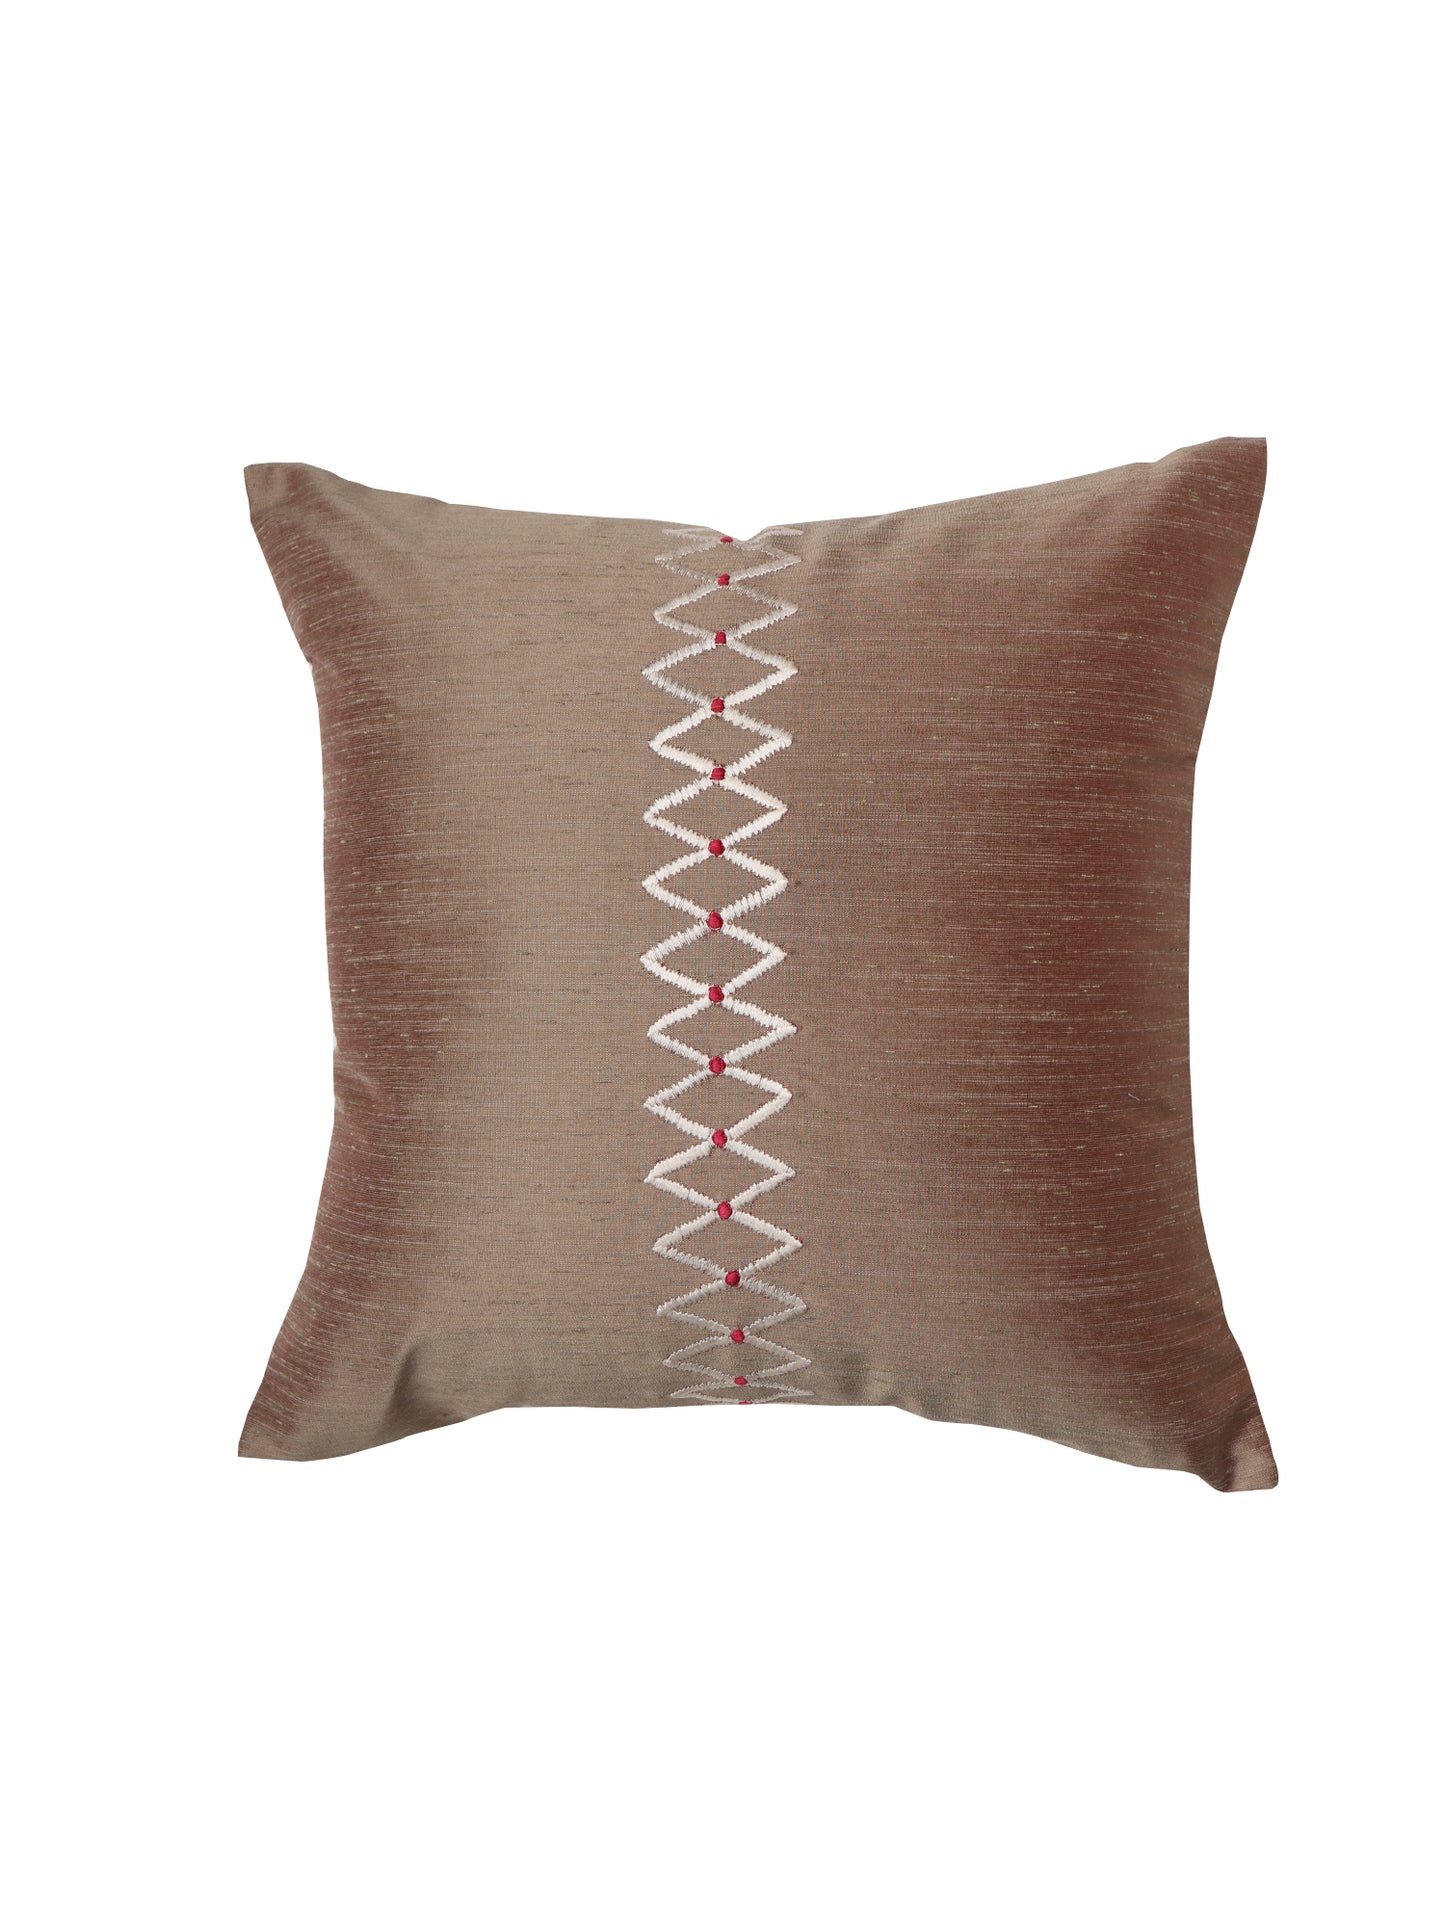 Cushion Cover Embroidered Zigzag Polyester Blend Mushroom Grey - 16" x 16"